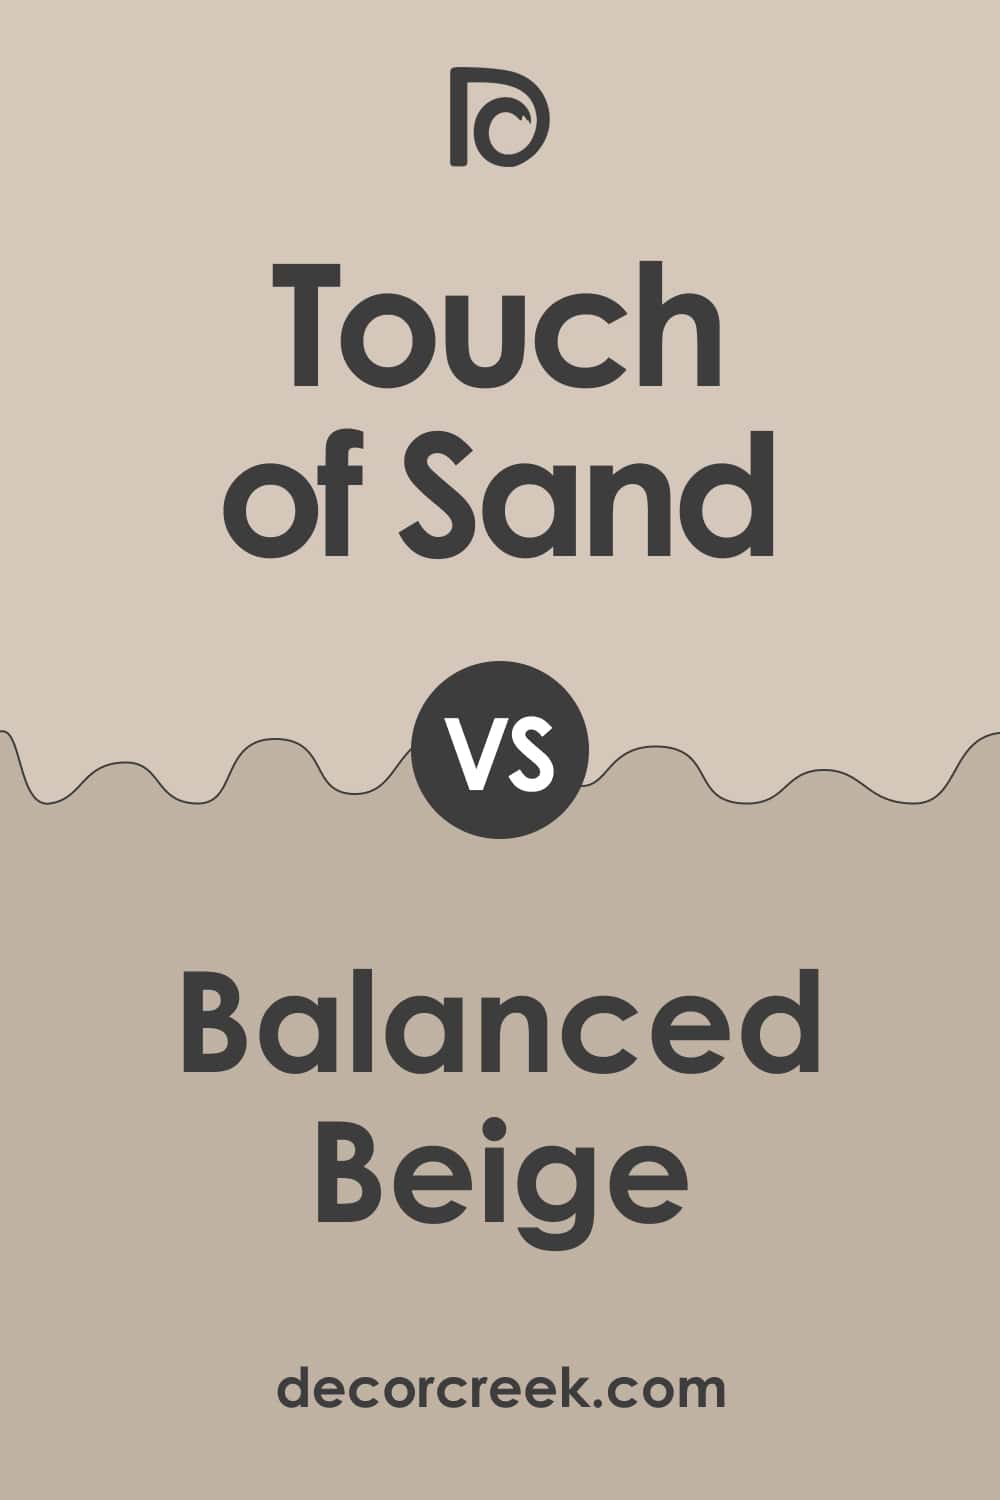 Touch of Sand vs Balanced Beige